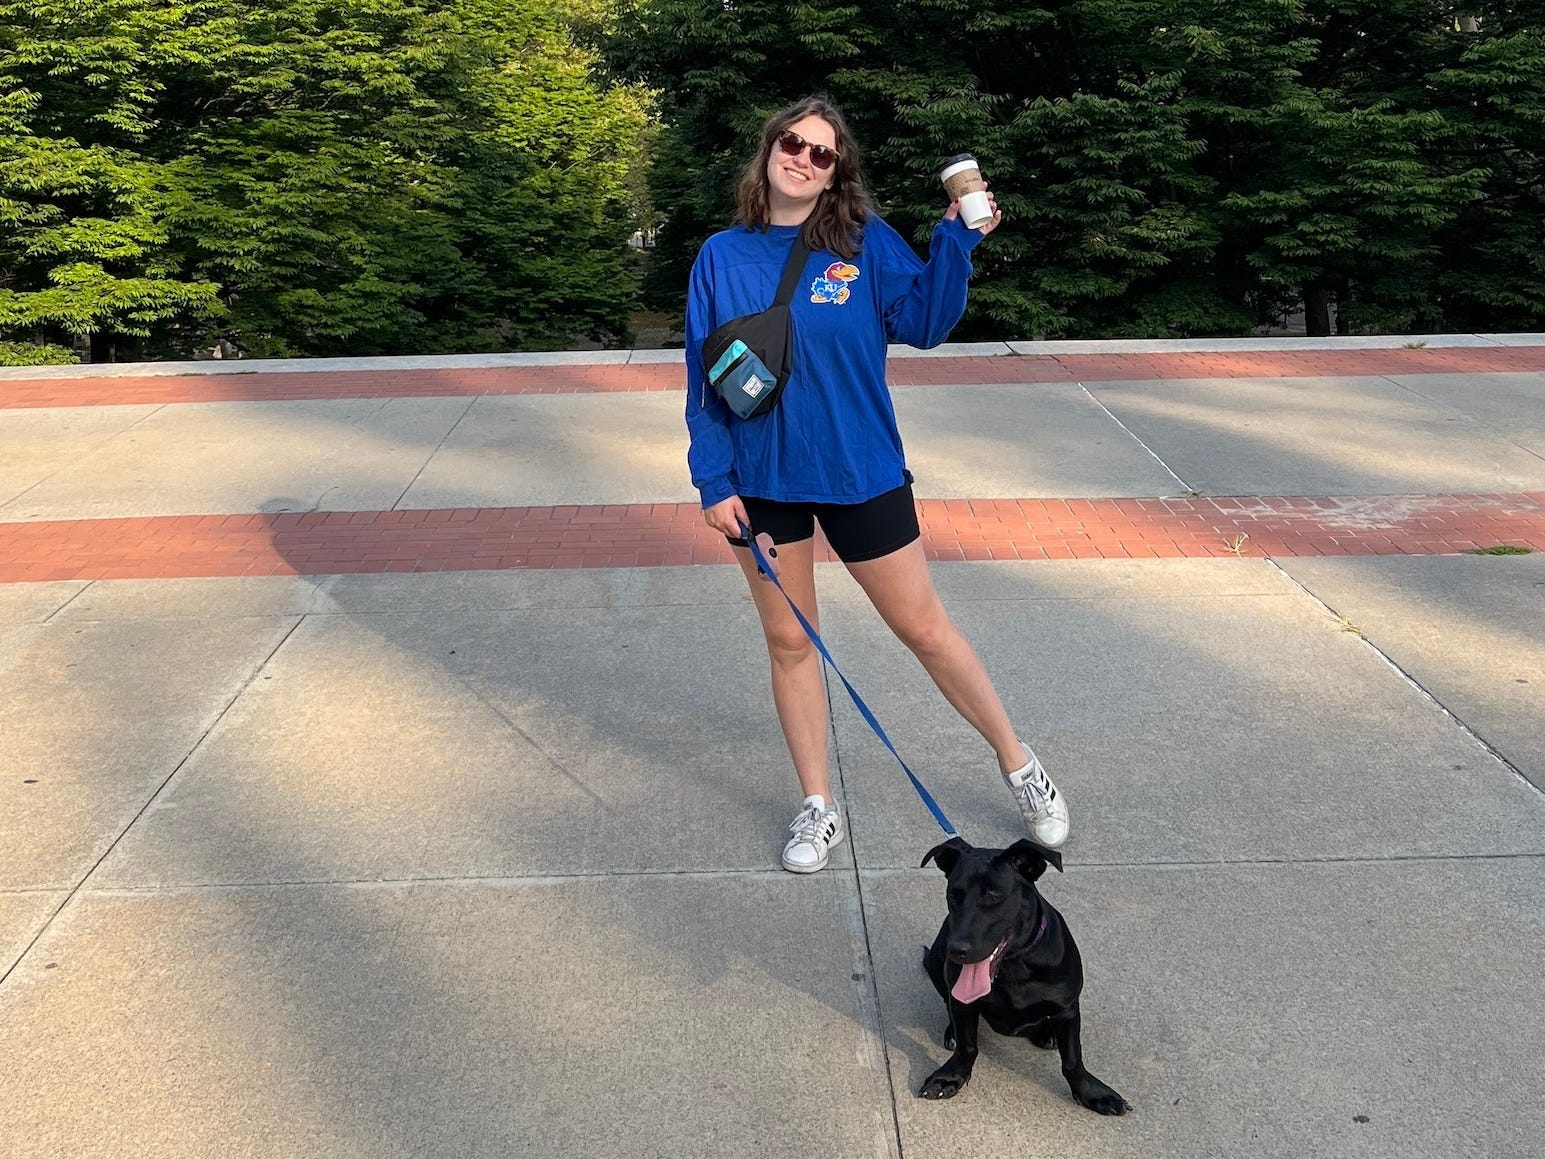 <p>Grindell started wearing her Hershel fanny pack regularly after she got her dog, and realized that being hands-free is also helpful when navigating airports.</p><p>Instead of digging around a tote bag or backpack for her wallet, boarding pass, keys, or passport, she stores all her essential items in the bag worn across her chest, making them easily accessible when needed.</p><p>Grindell also said her trusty fanny pack has done wonders to put her mind at ease when traveling, since she gets nervous she'll lose important items at the airport.</p><p><a href="https://www.insider.com/fanny-pack-best-bag-for-airport-2023-7">Read more.</a></p>